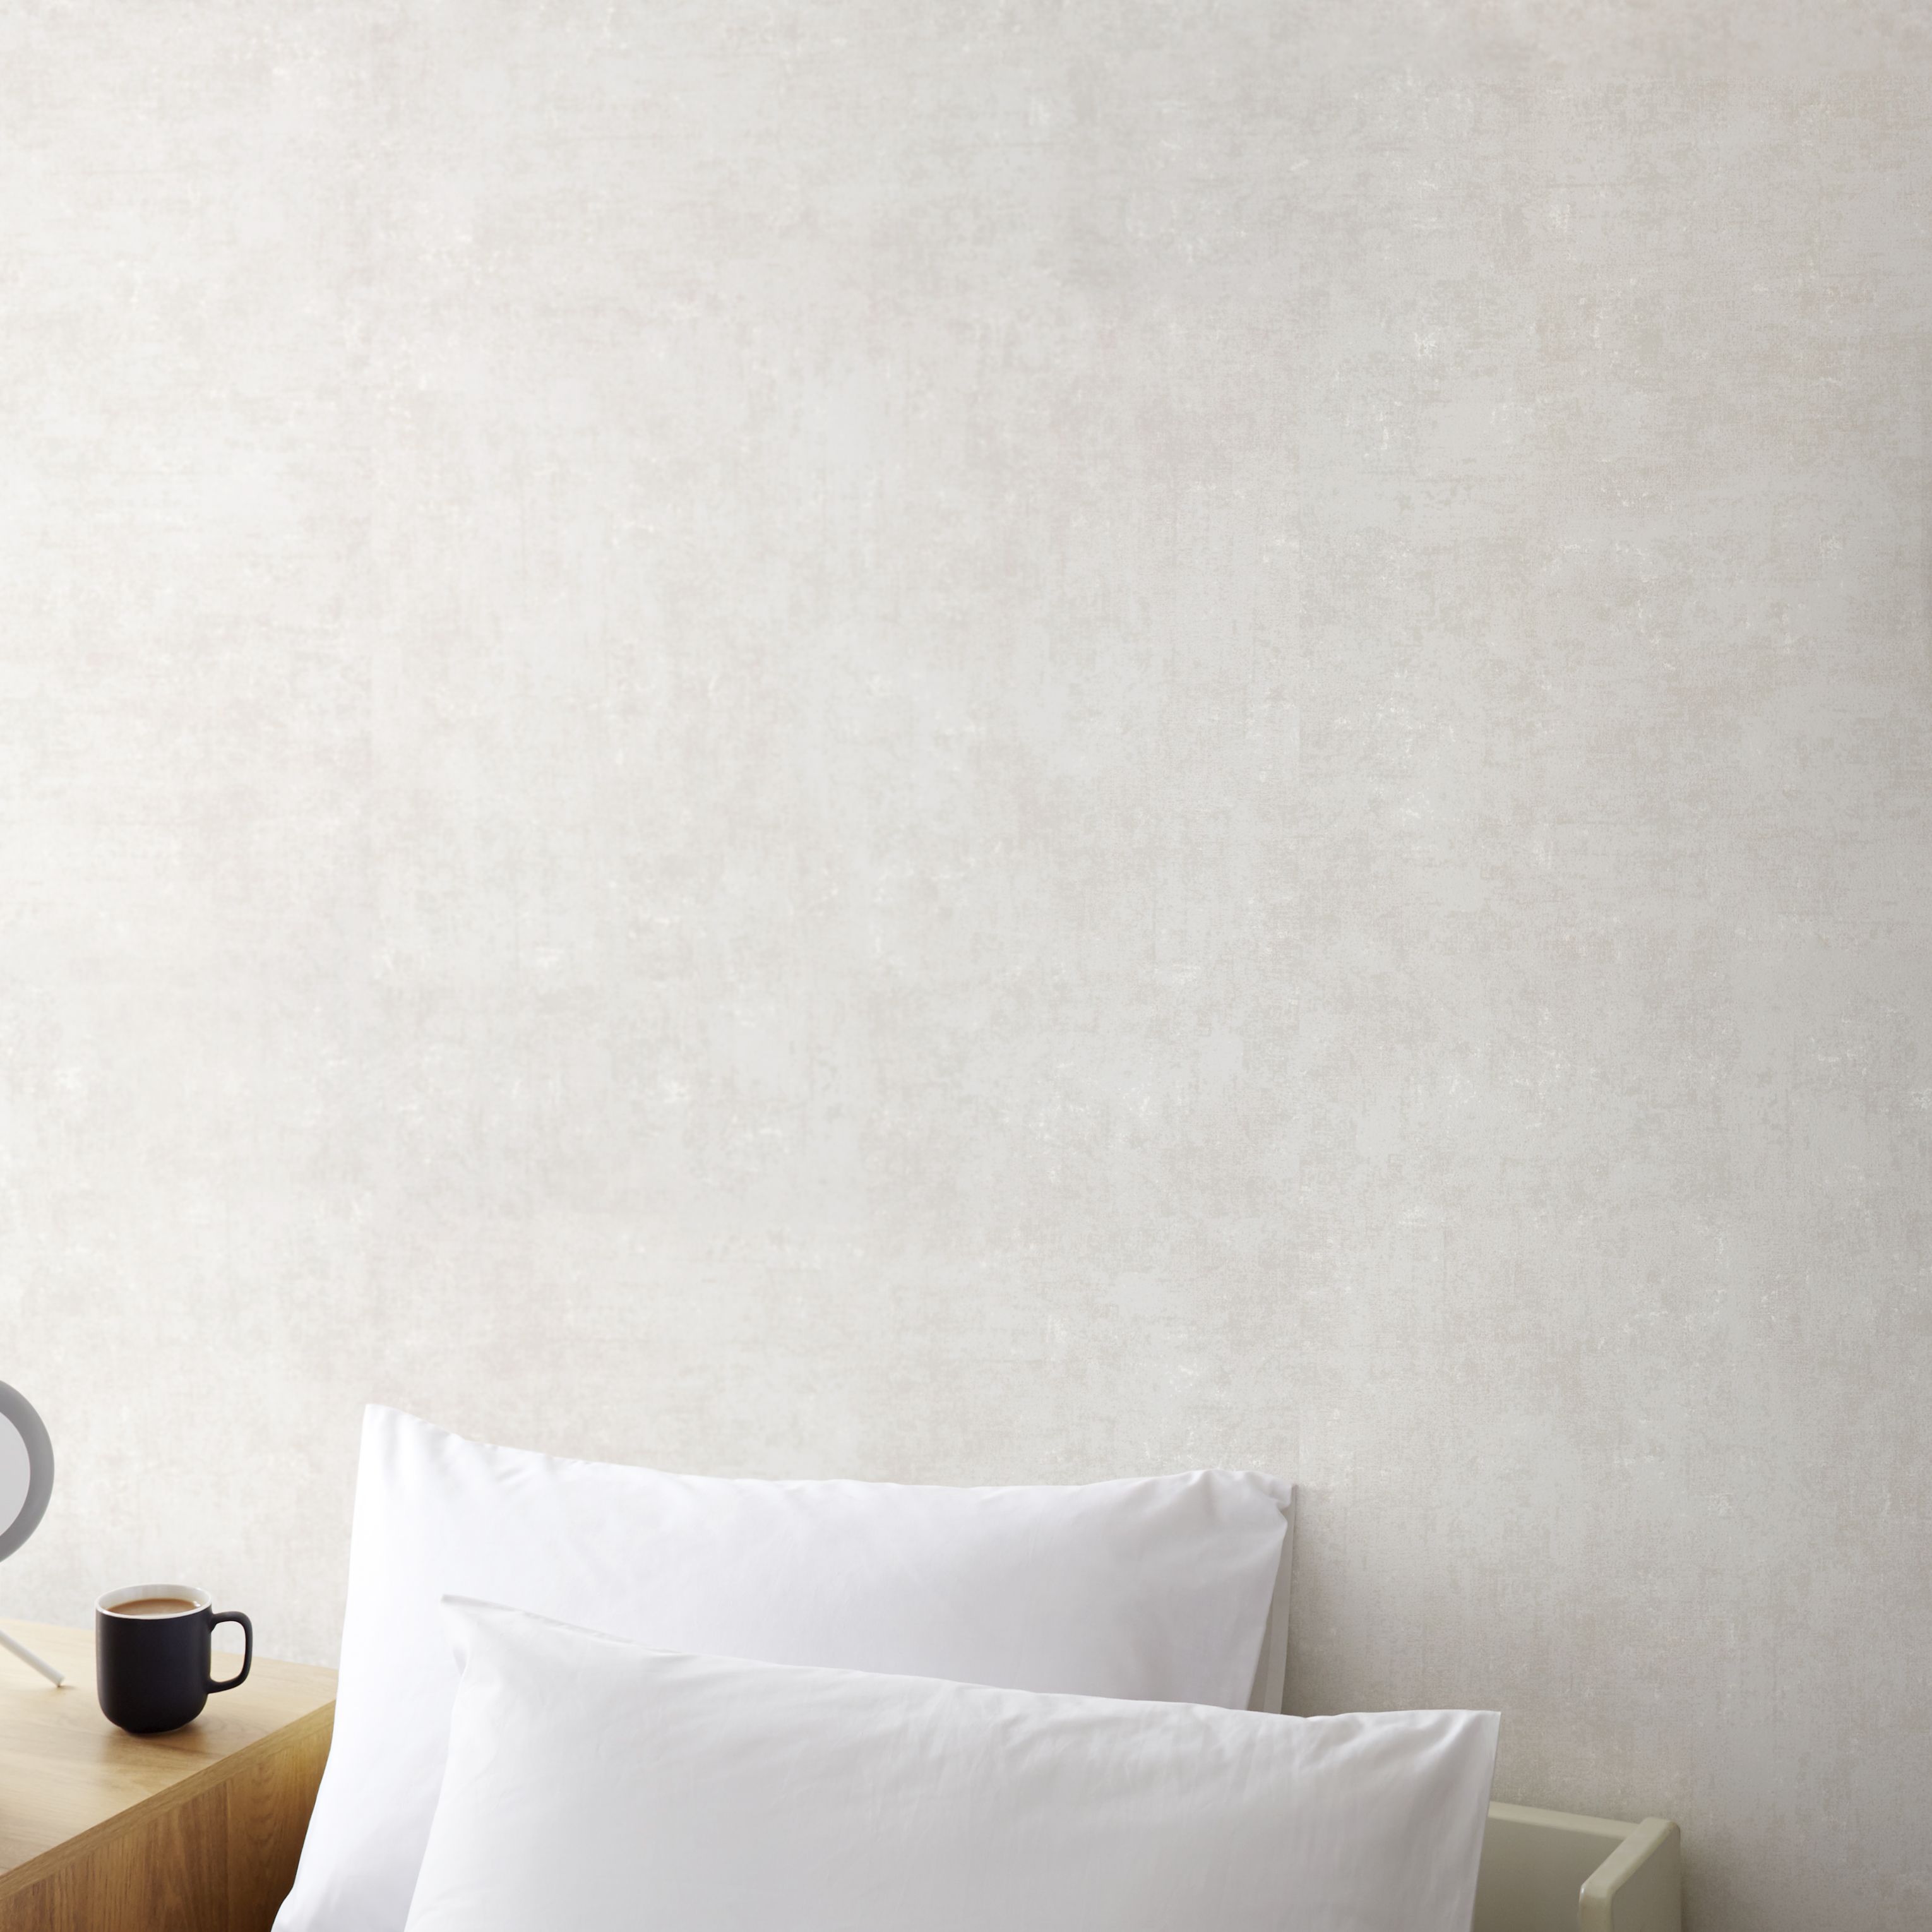 GoodHome Sarry White Concrete effect Textured Wallpaper Sample